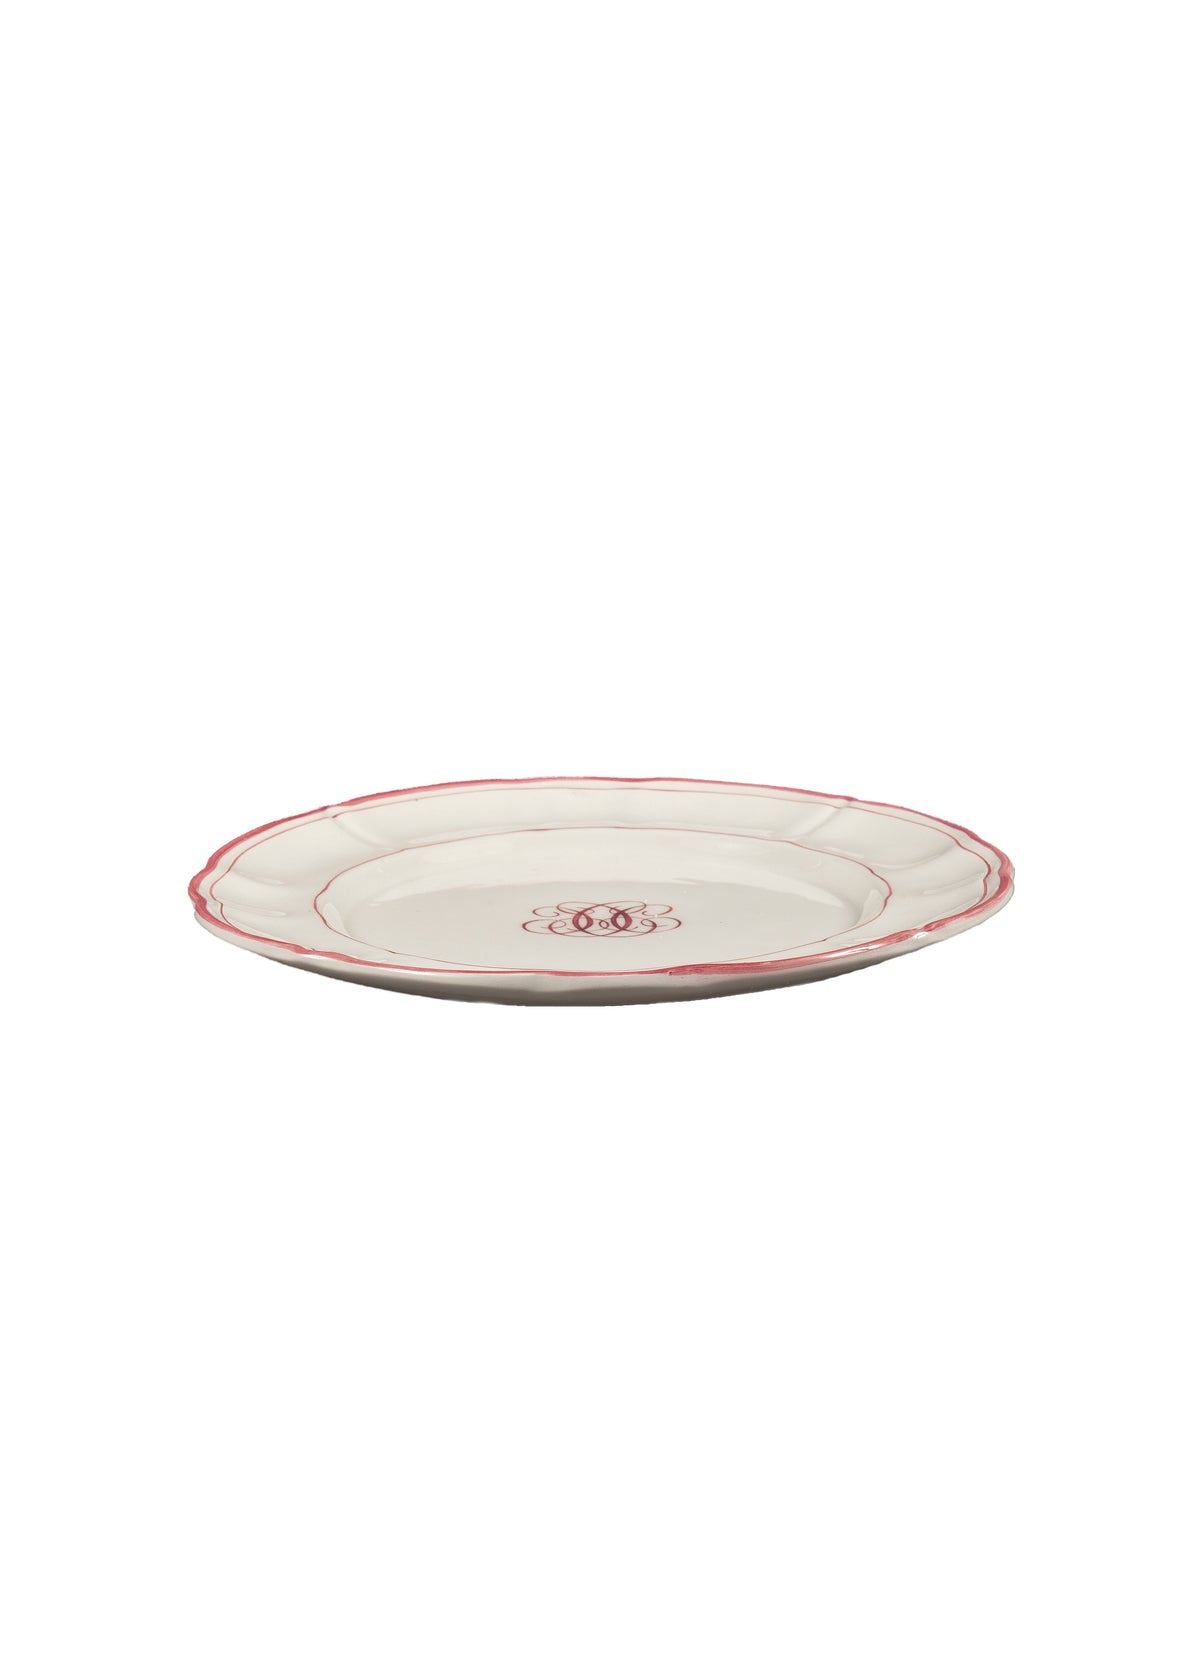 Bespoke Milano Plate with Central Monogram and Rim, Set of 12